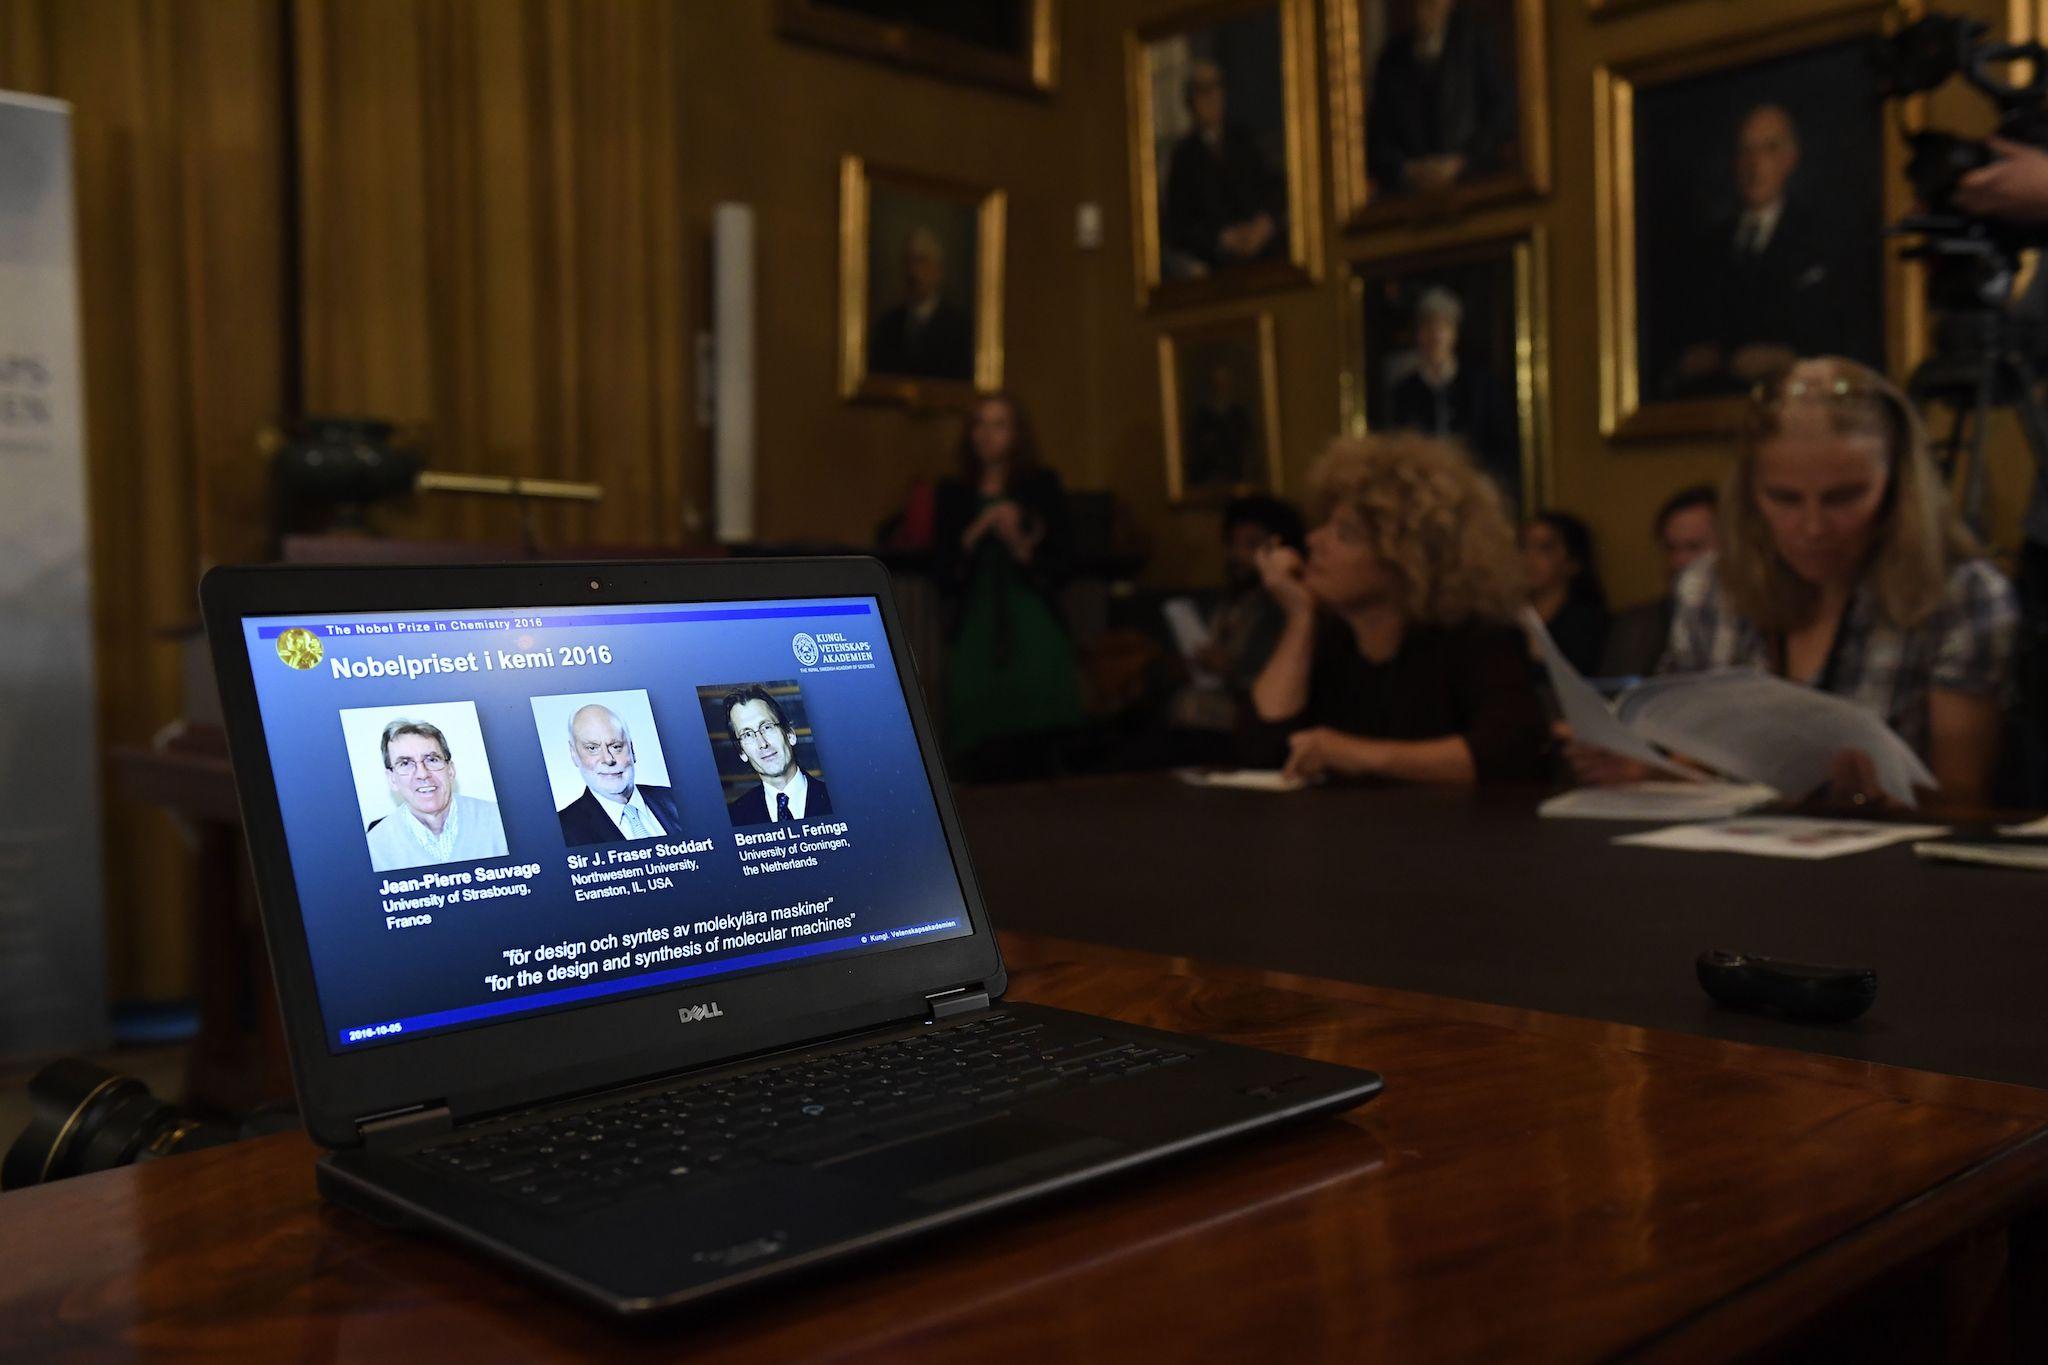 Sir J Fraser Stoddart (centre) appears on a laptop screen as he, Jean-Pierre Sauvage and Bernard L Feringa are proclaimed the winners of the Nobel Prize for Chemistry